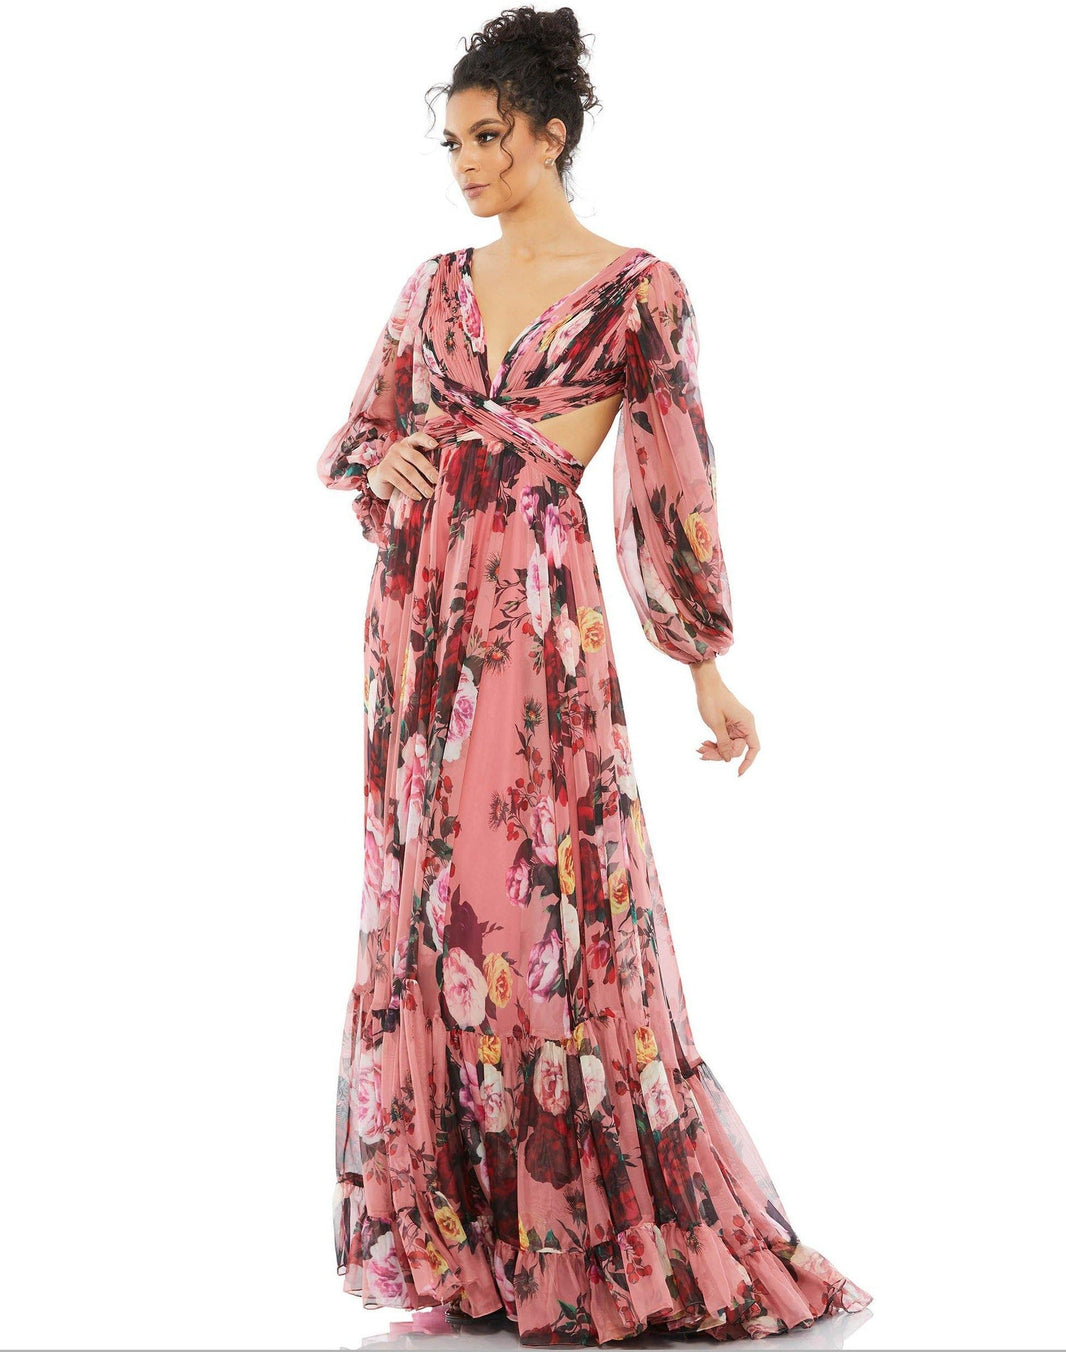 Grab Trendy Plus Size Maxi Dresses at - The Dress Outlet